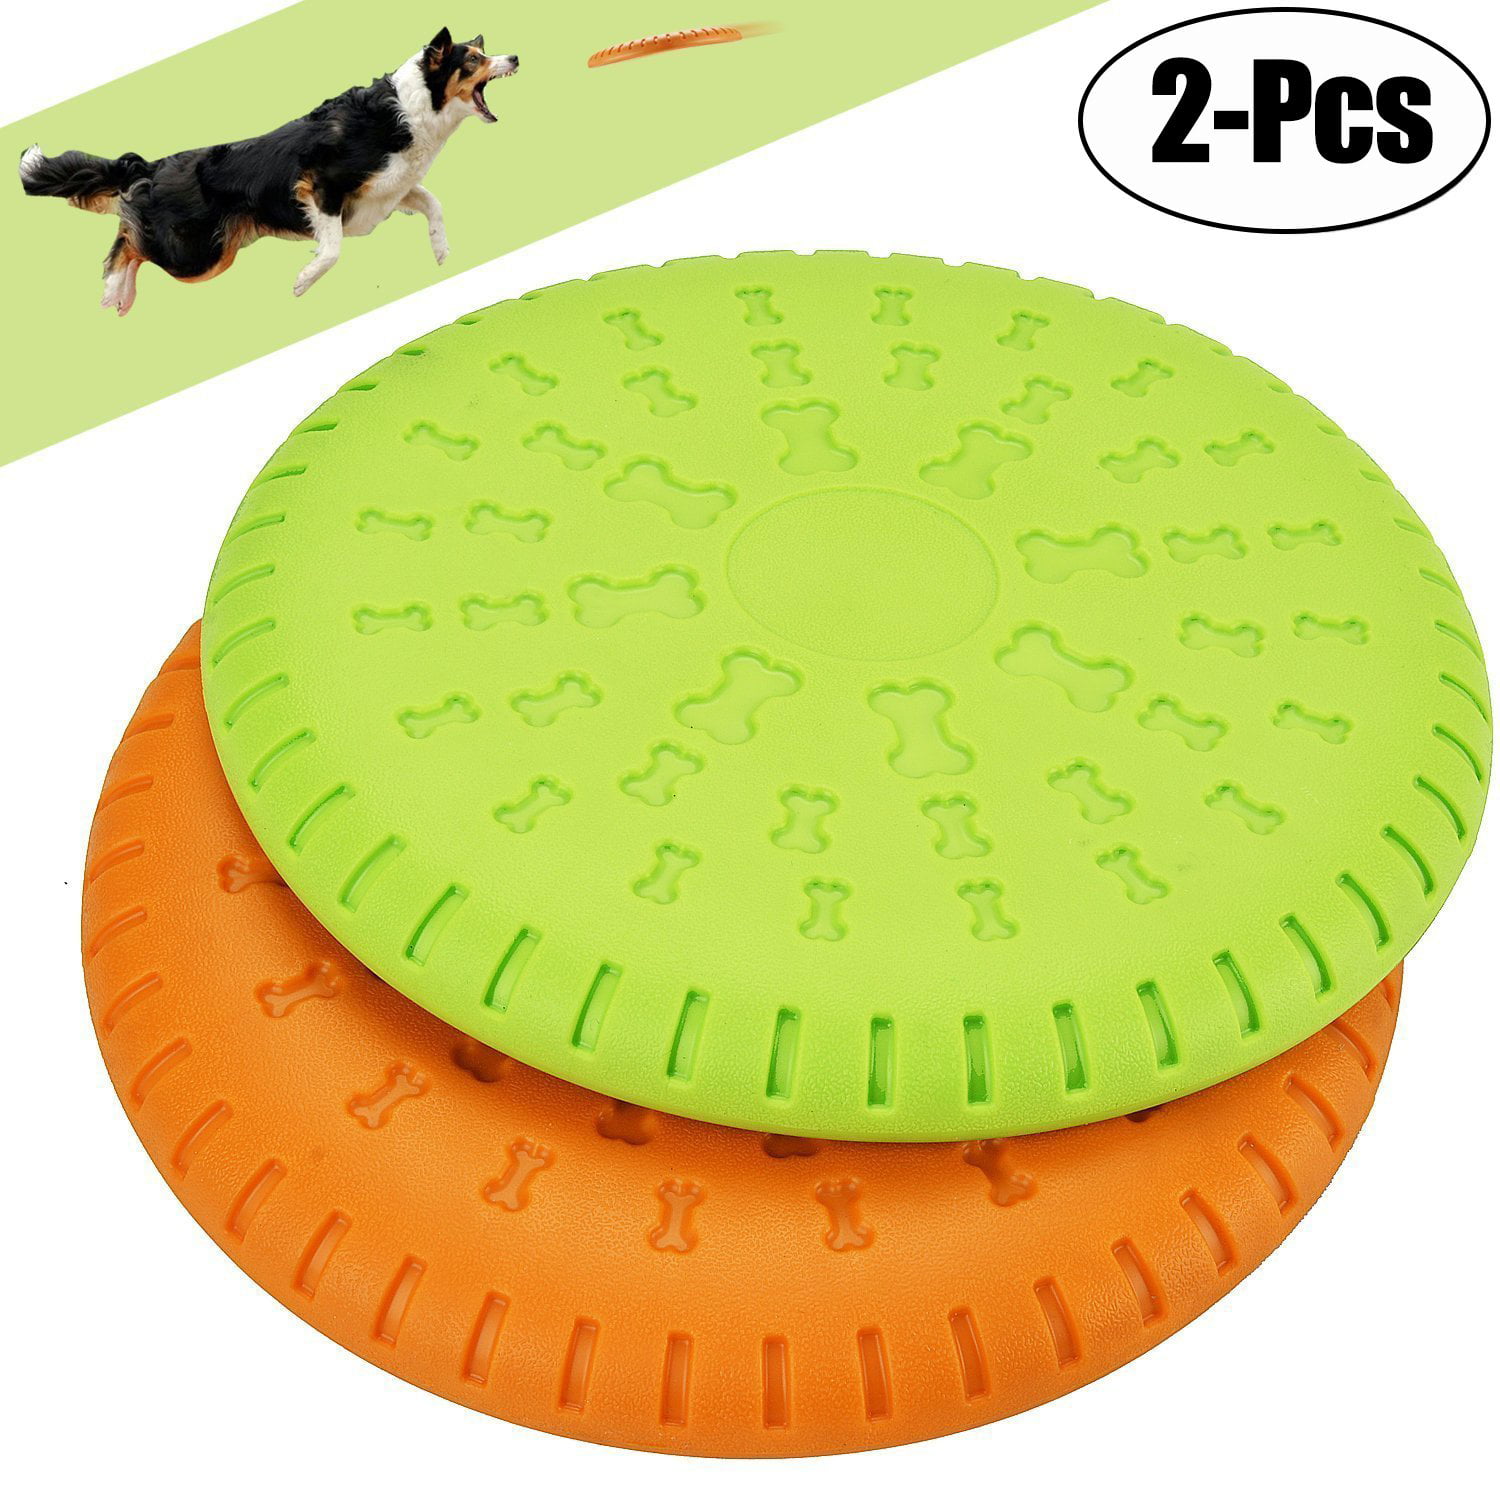 Dog Frisbee Toy Exercise Pet Training Tool Puppy Saucer Flying Disc Pet Supplies 